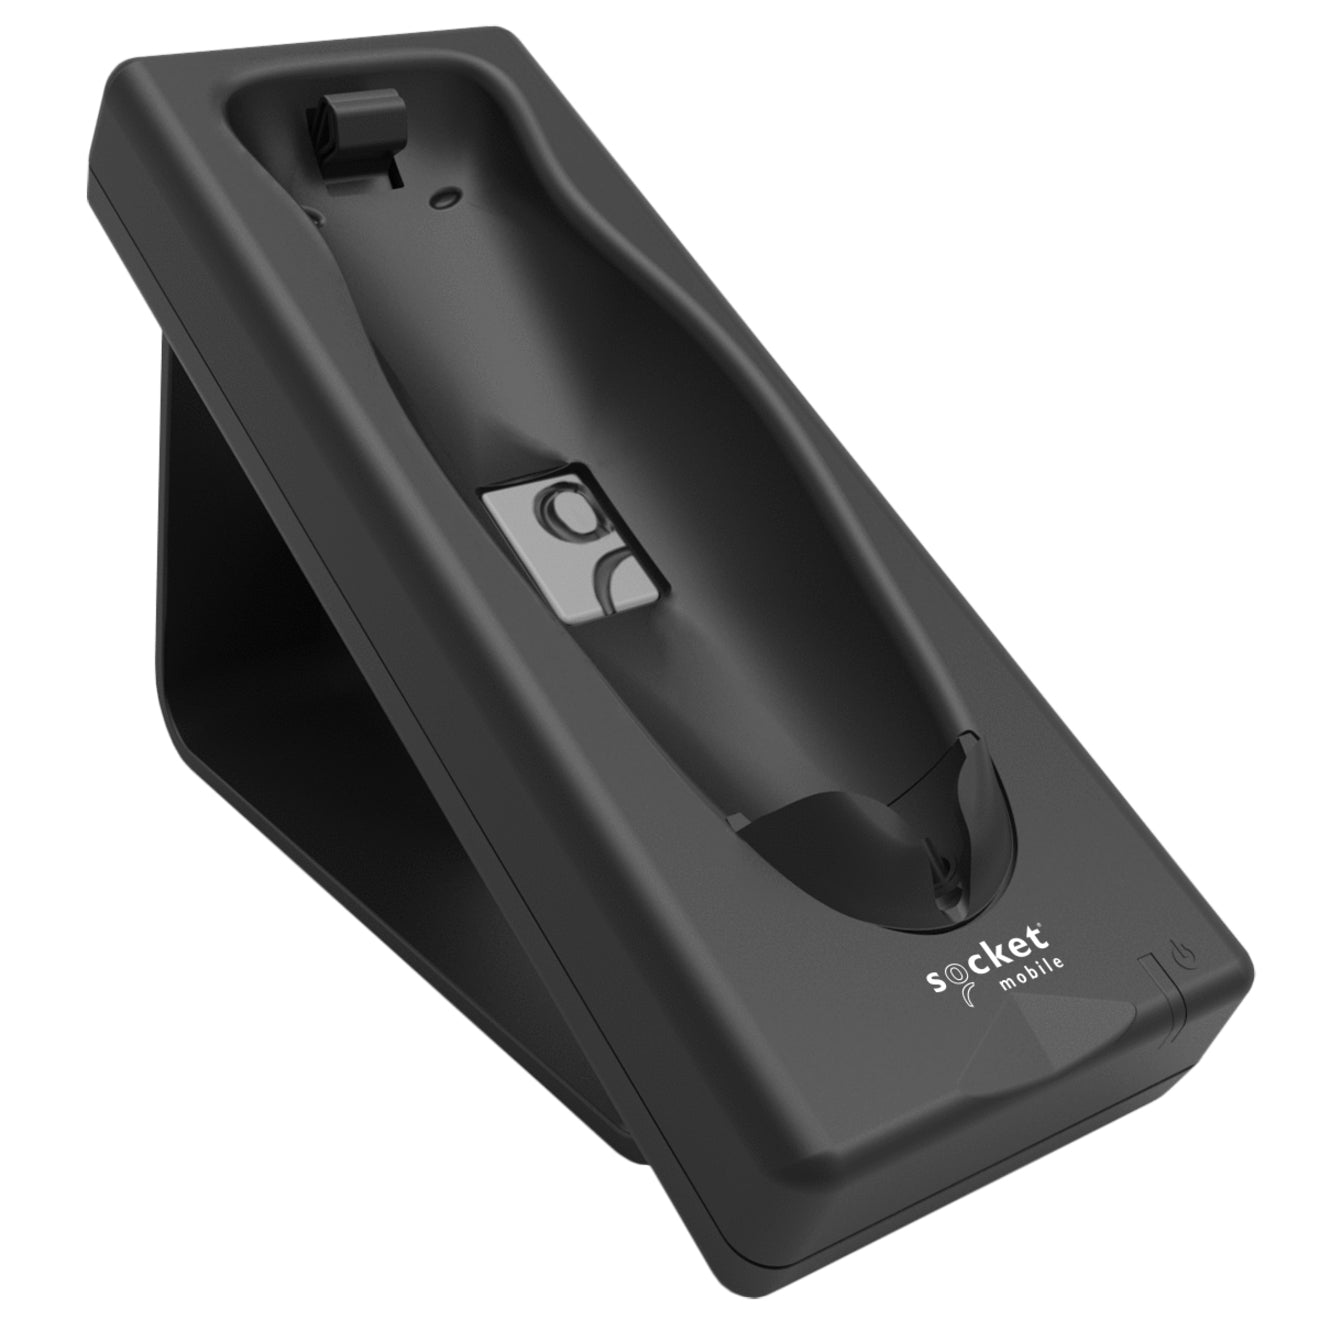 Socket Mobile AC4102-1695 Charging Cradle for DuraScan Barcode Scanners, Black - Convenient Docking and Charging Solution